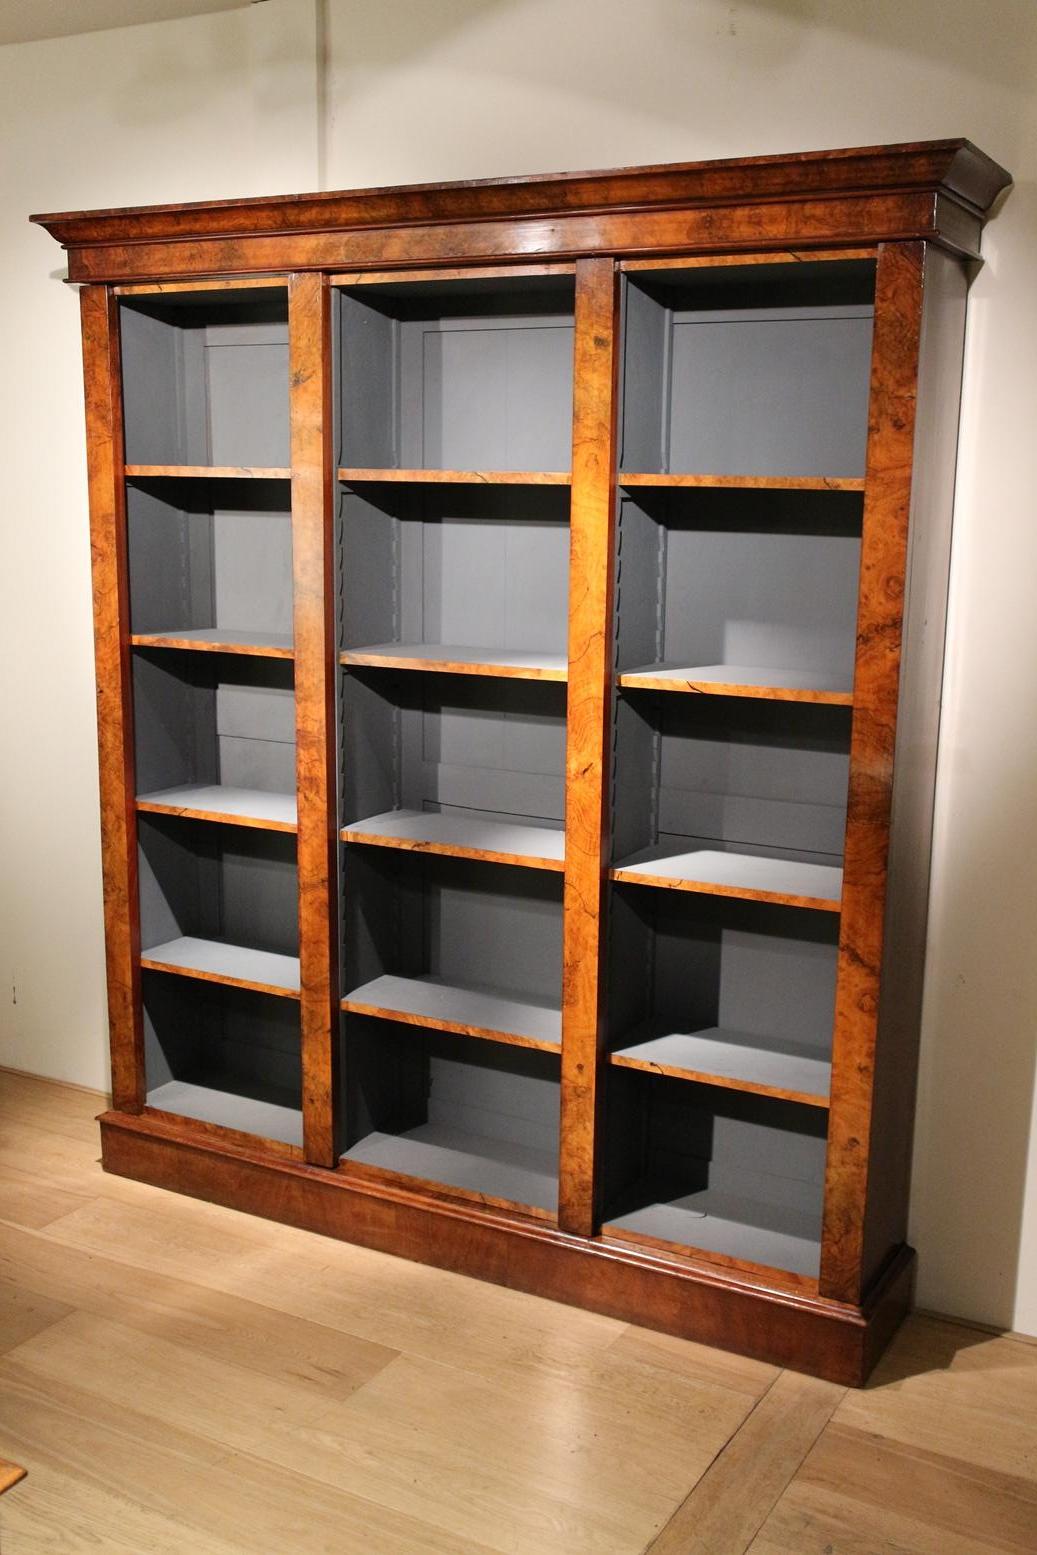 Beautiful antique open bookcase, the inside of which is finished in blue. Shelves are adjustable. the burr walnut has a beautiful pattern and color. Details such as the front of the shelves, make it a beautiful piece. Cabinet consists of 4